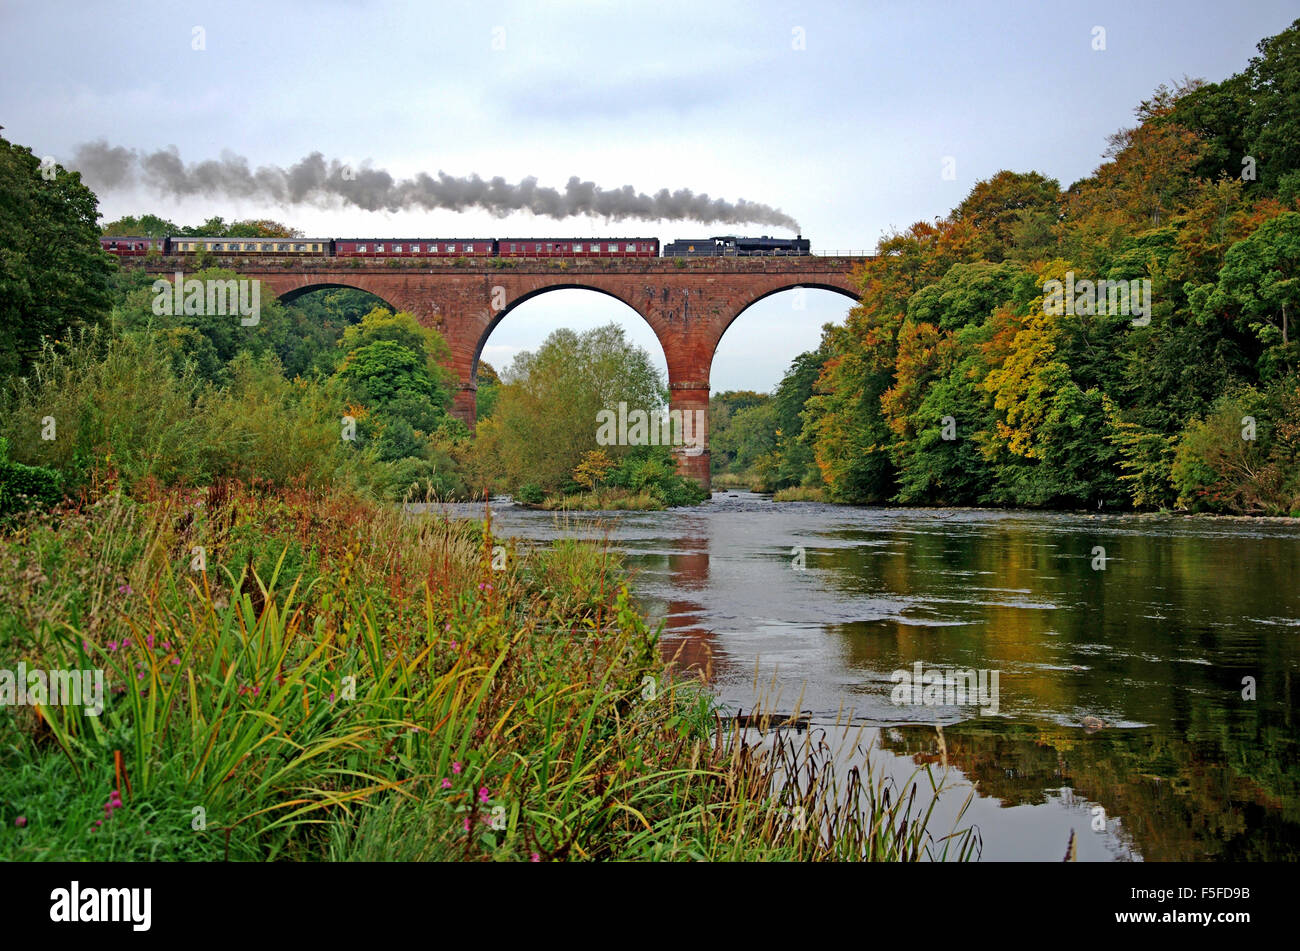 45699 'Leander' crosses the river Eden and Wetheral viaduct, with 'The Hadrian' Stock Photo